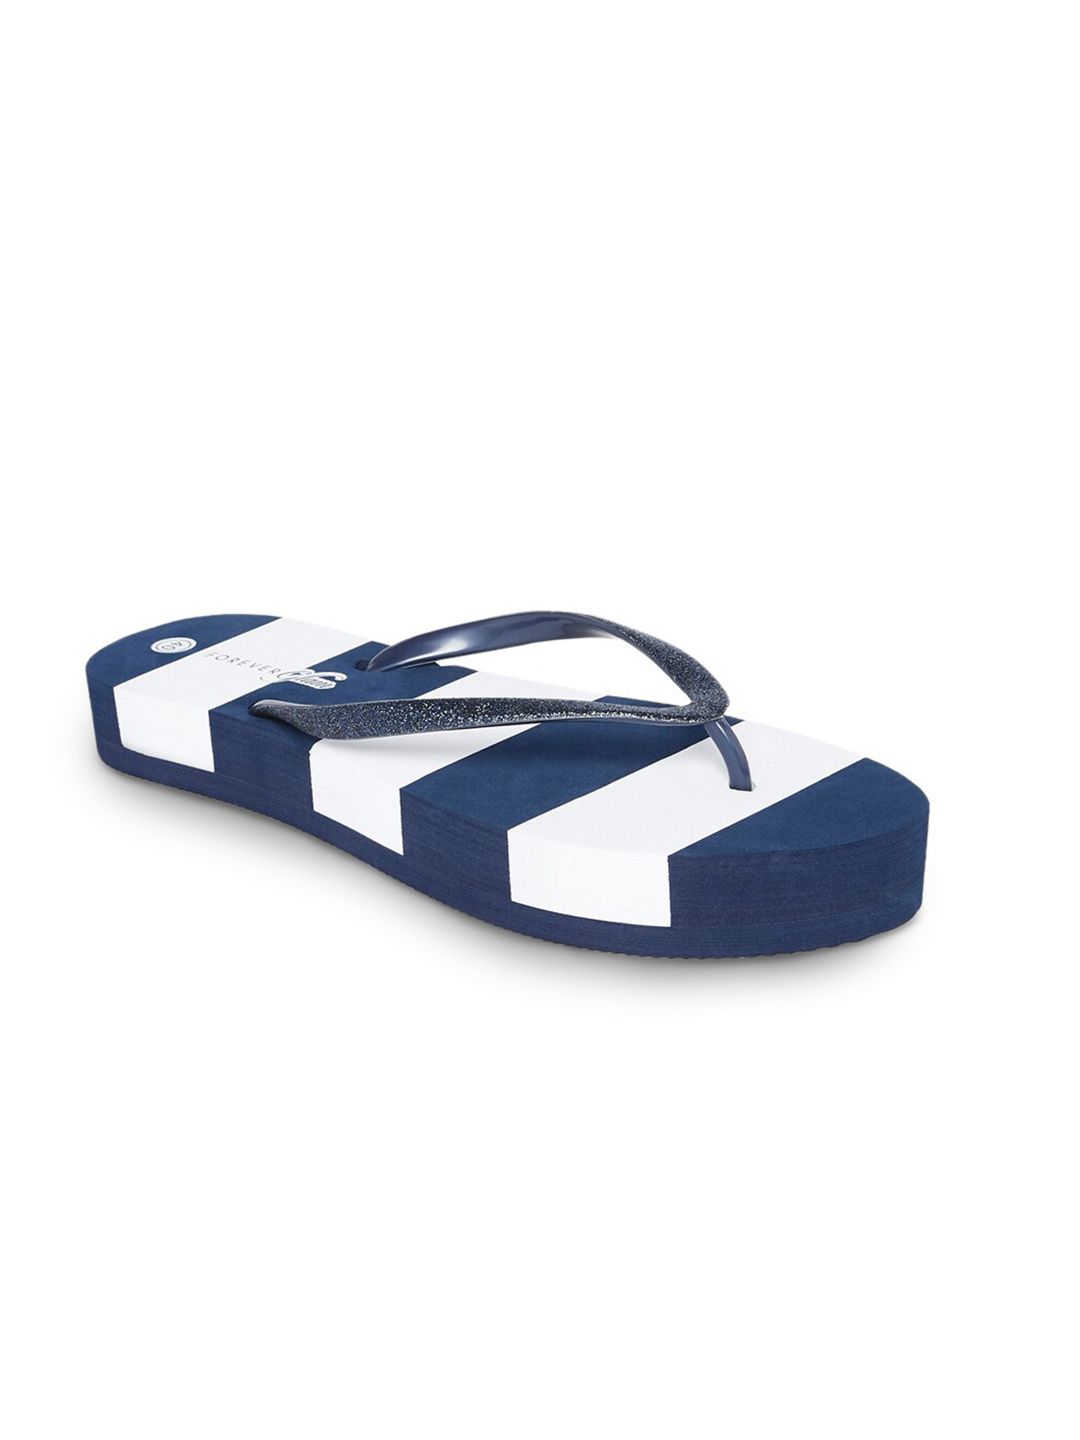 Forever Glam by Pantaloons Women Navy Blue & White Striped Thong Flip-Flops Price in India